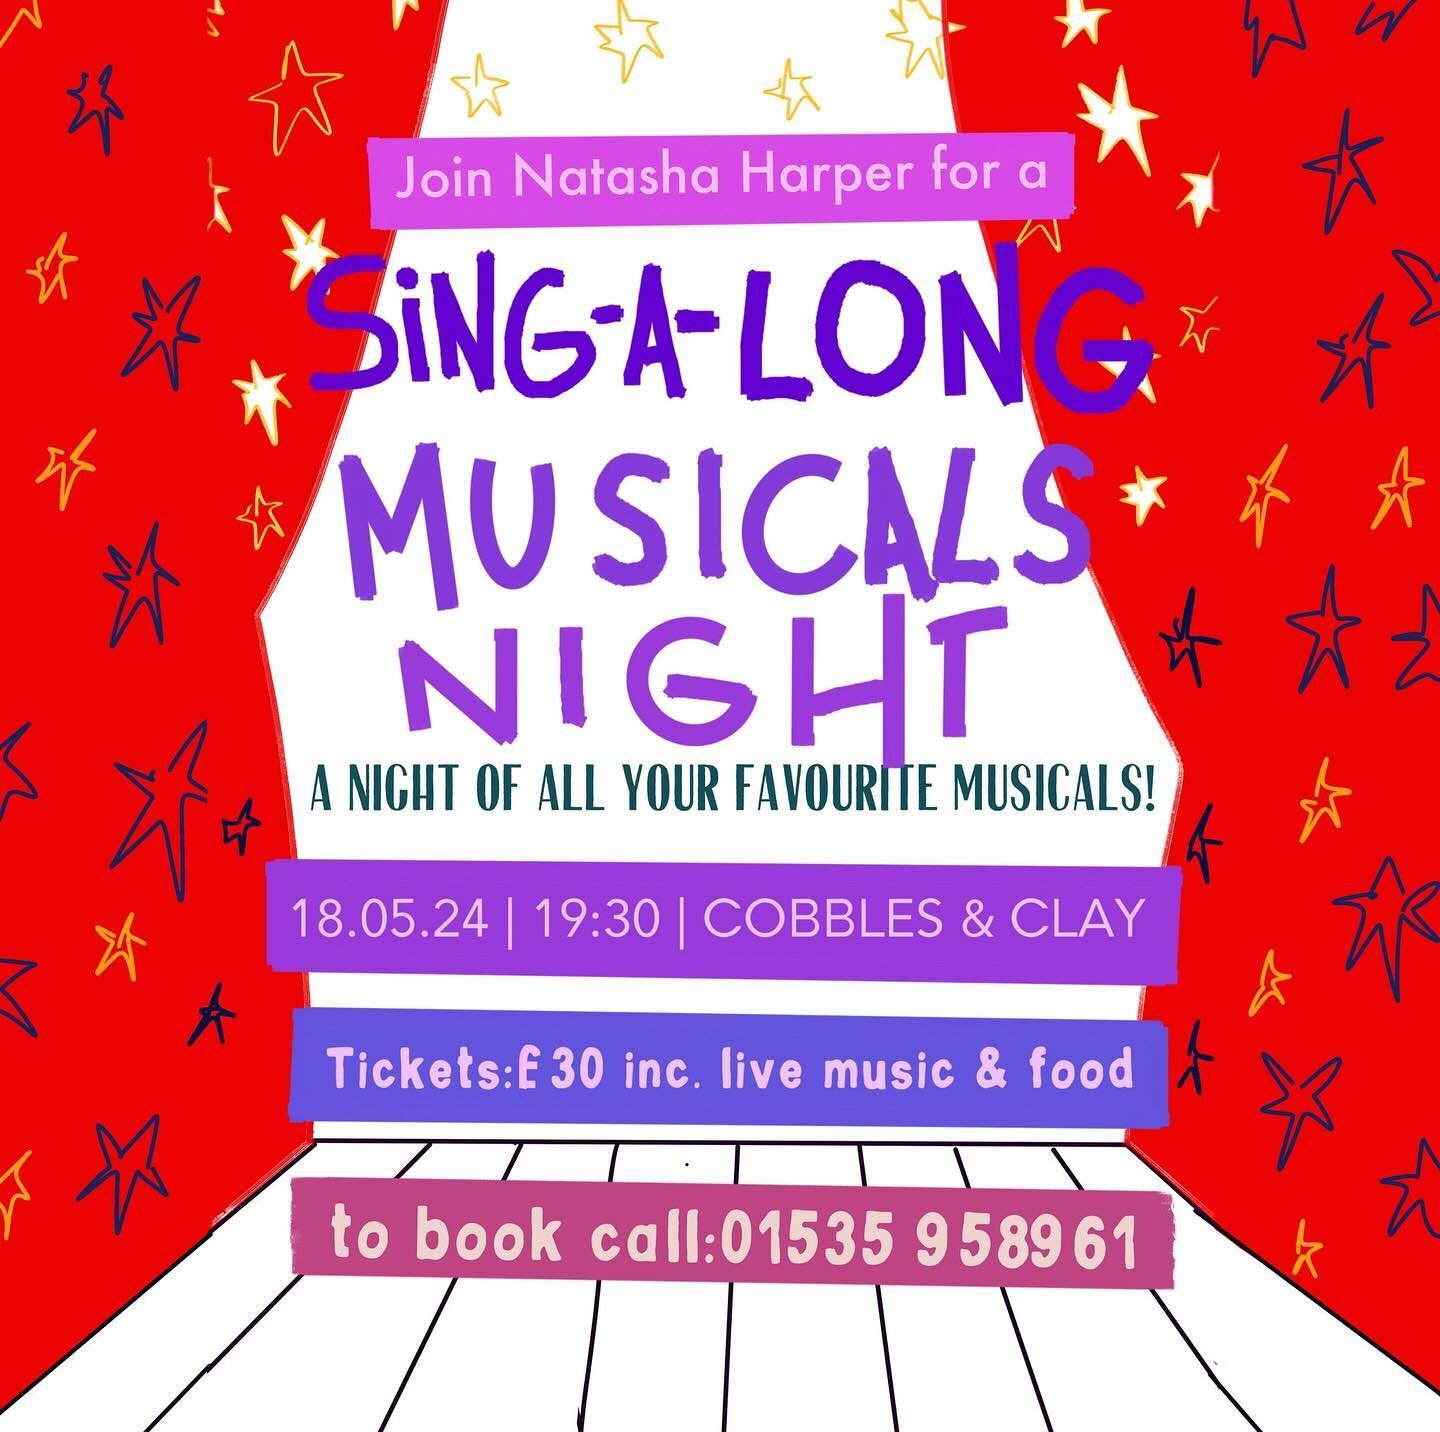 Sing-A-Long Nights 🎤🕺🎶✨

Our sing-a-long evenings with Natasha Harper are becoming a monthly fixture. Join us for &hellip; 

Mamma Mia ~ Friday 12th April 🪩
60s &amp; 70s Music ~ Saturday 10th May 🕺
Musicals Night ~ Saturday 18th May 🎤✨

See po